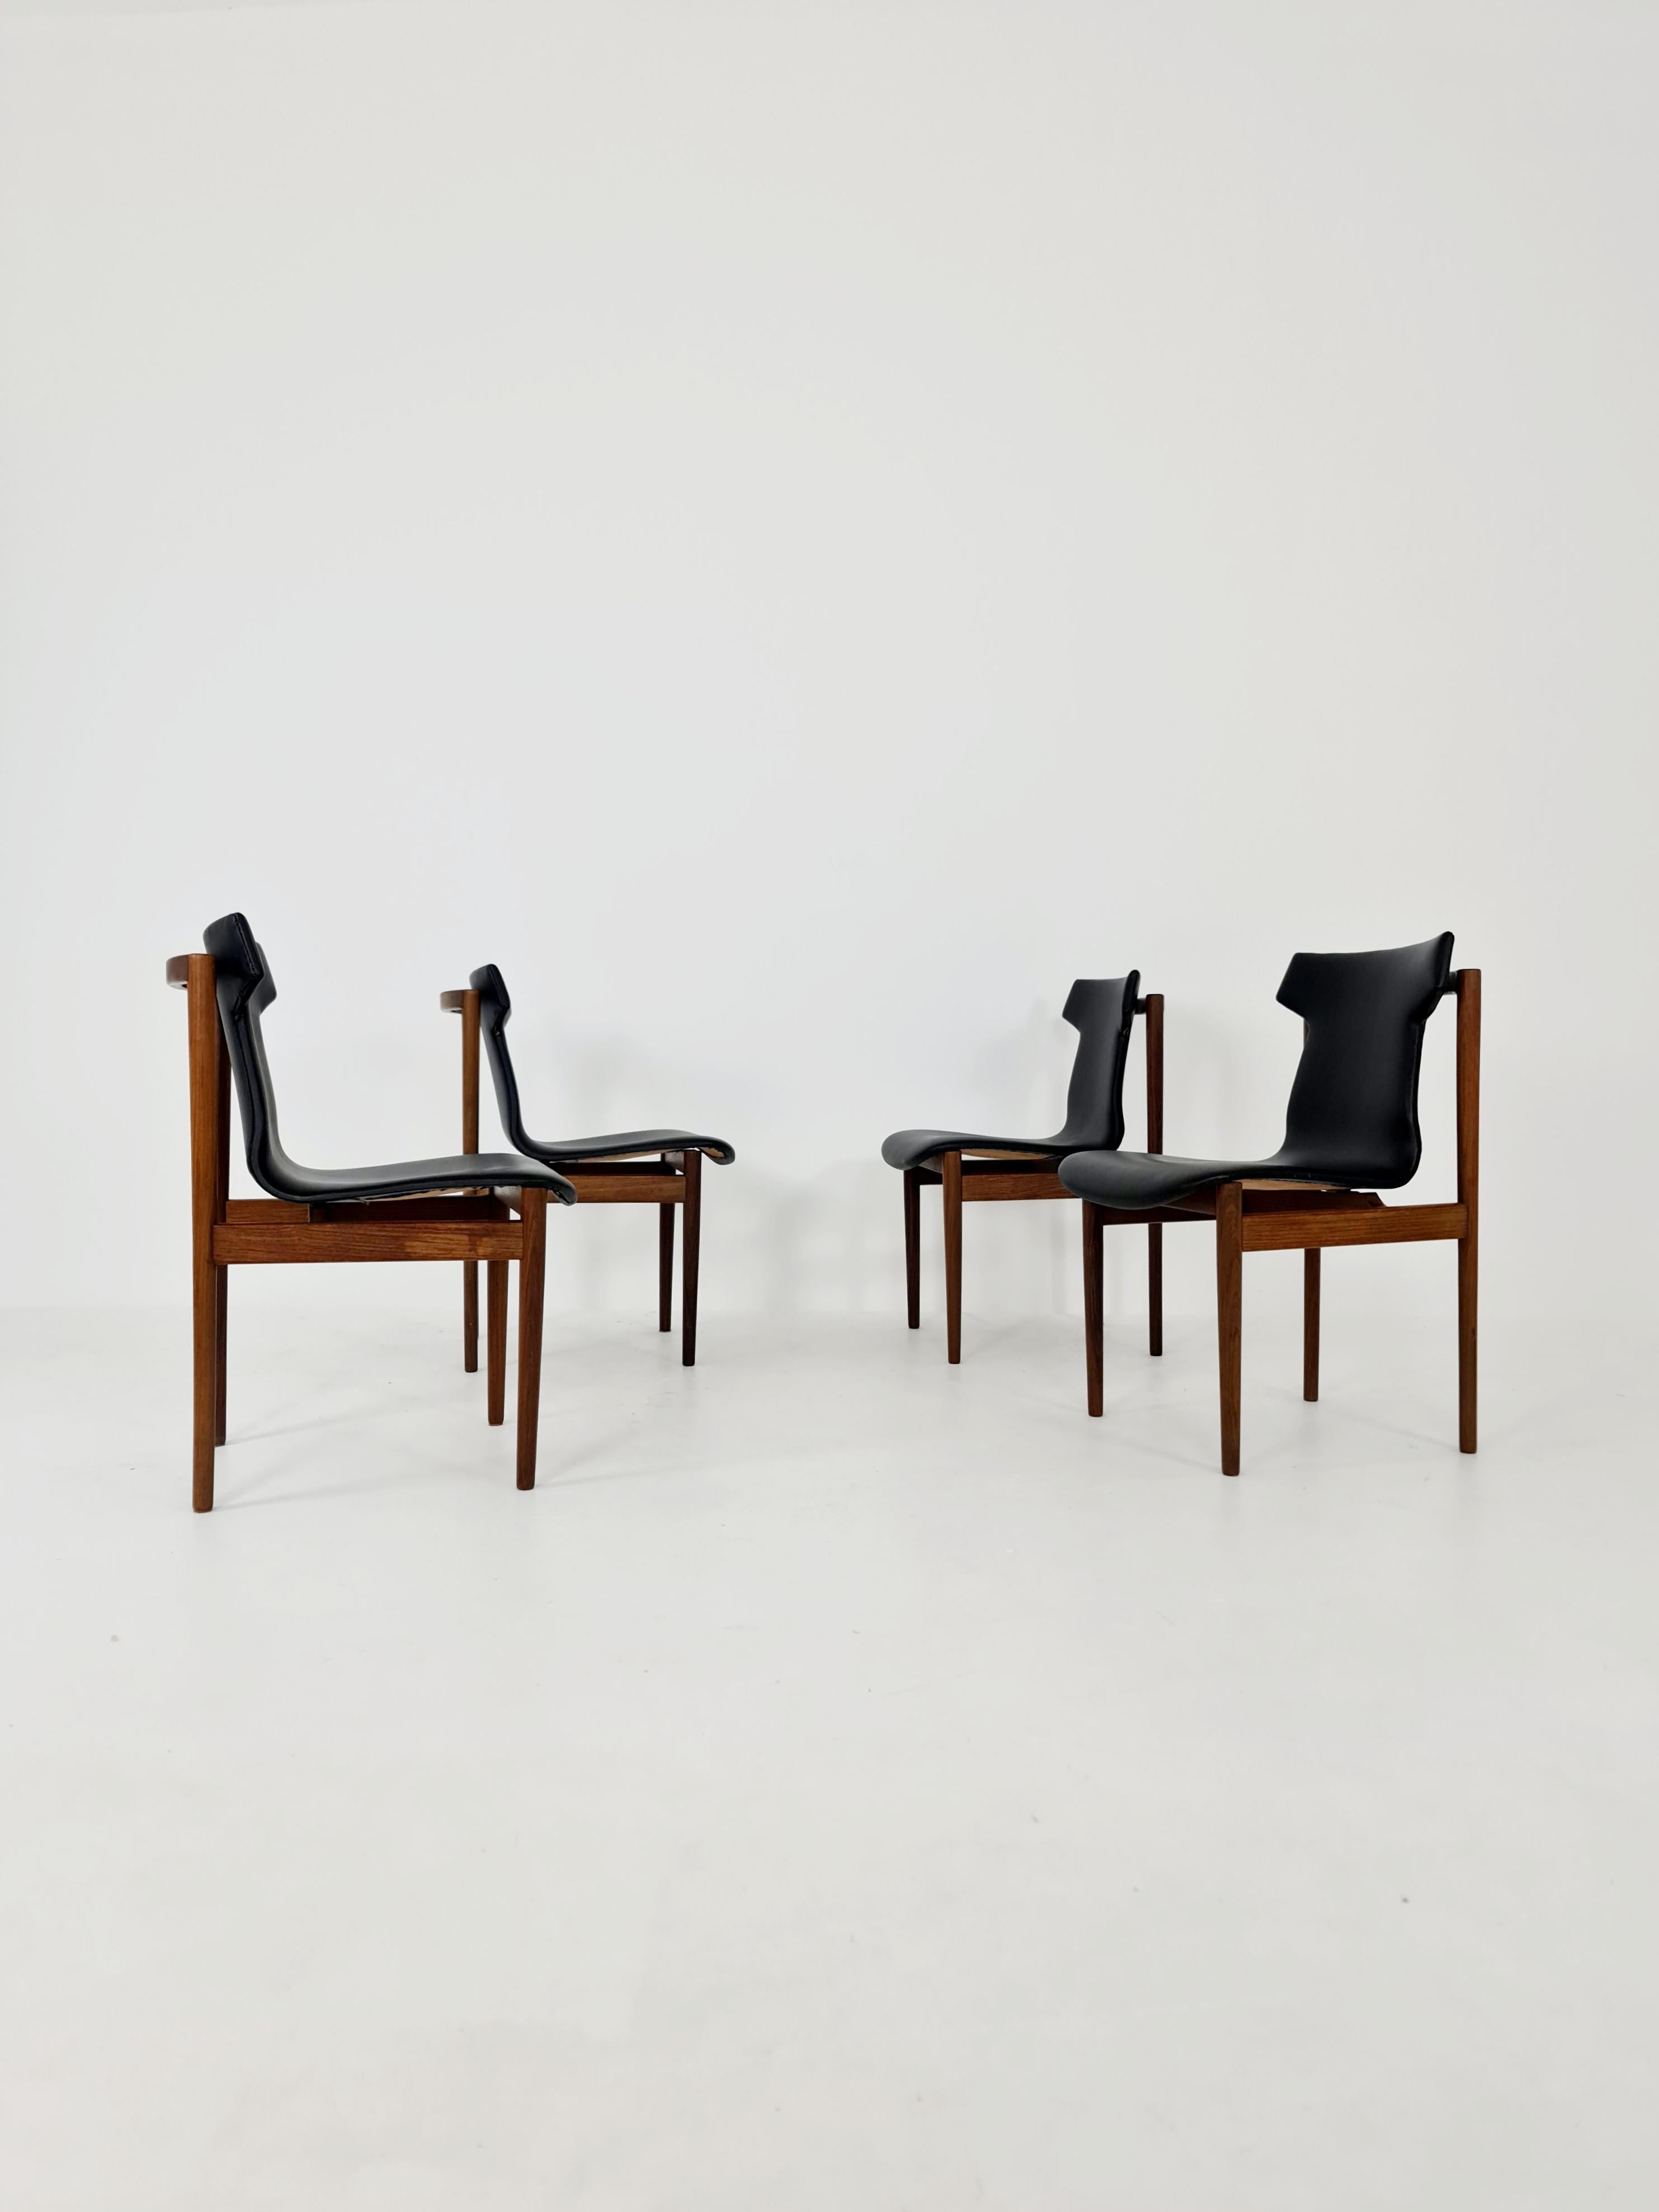 Vintage solid Rosewood  dining chairs By Inger Klingenberg for Fristho  Holland   , 1960s, Set of 4

The chair frames are made from solid Roeswood , in good vintage condtion, however, as with all vintage items some minor wear marks should be